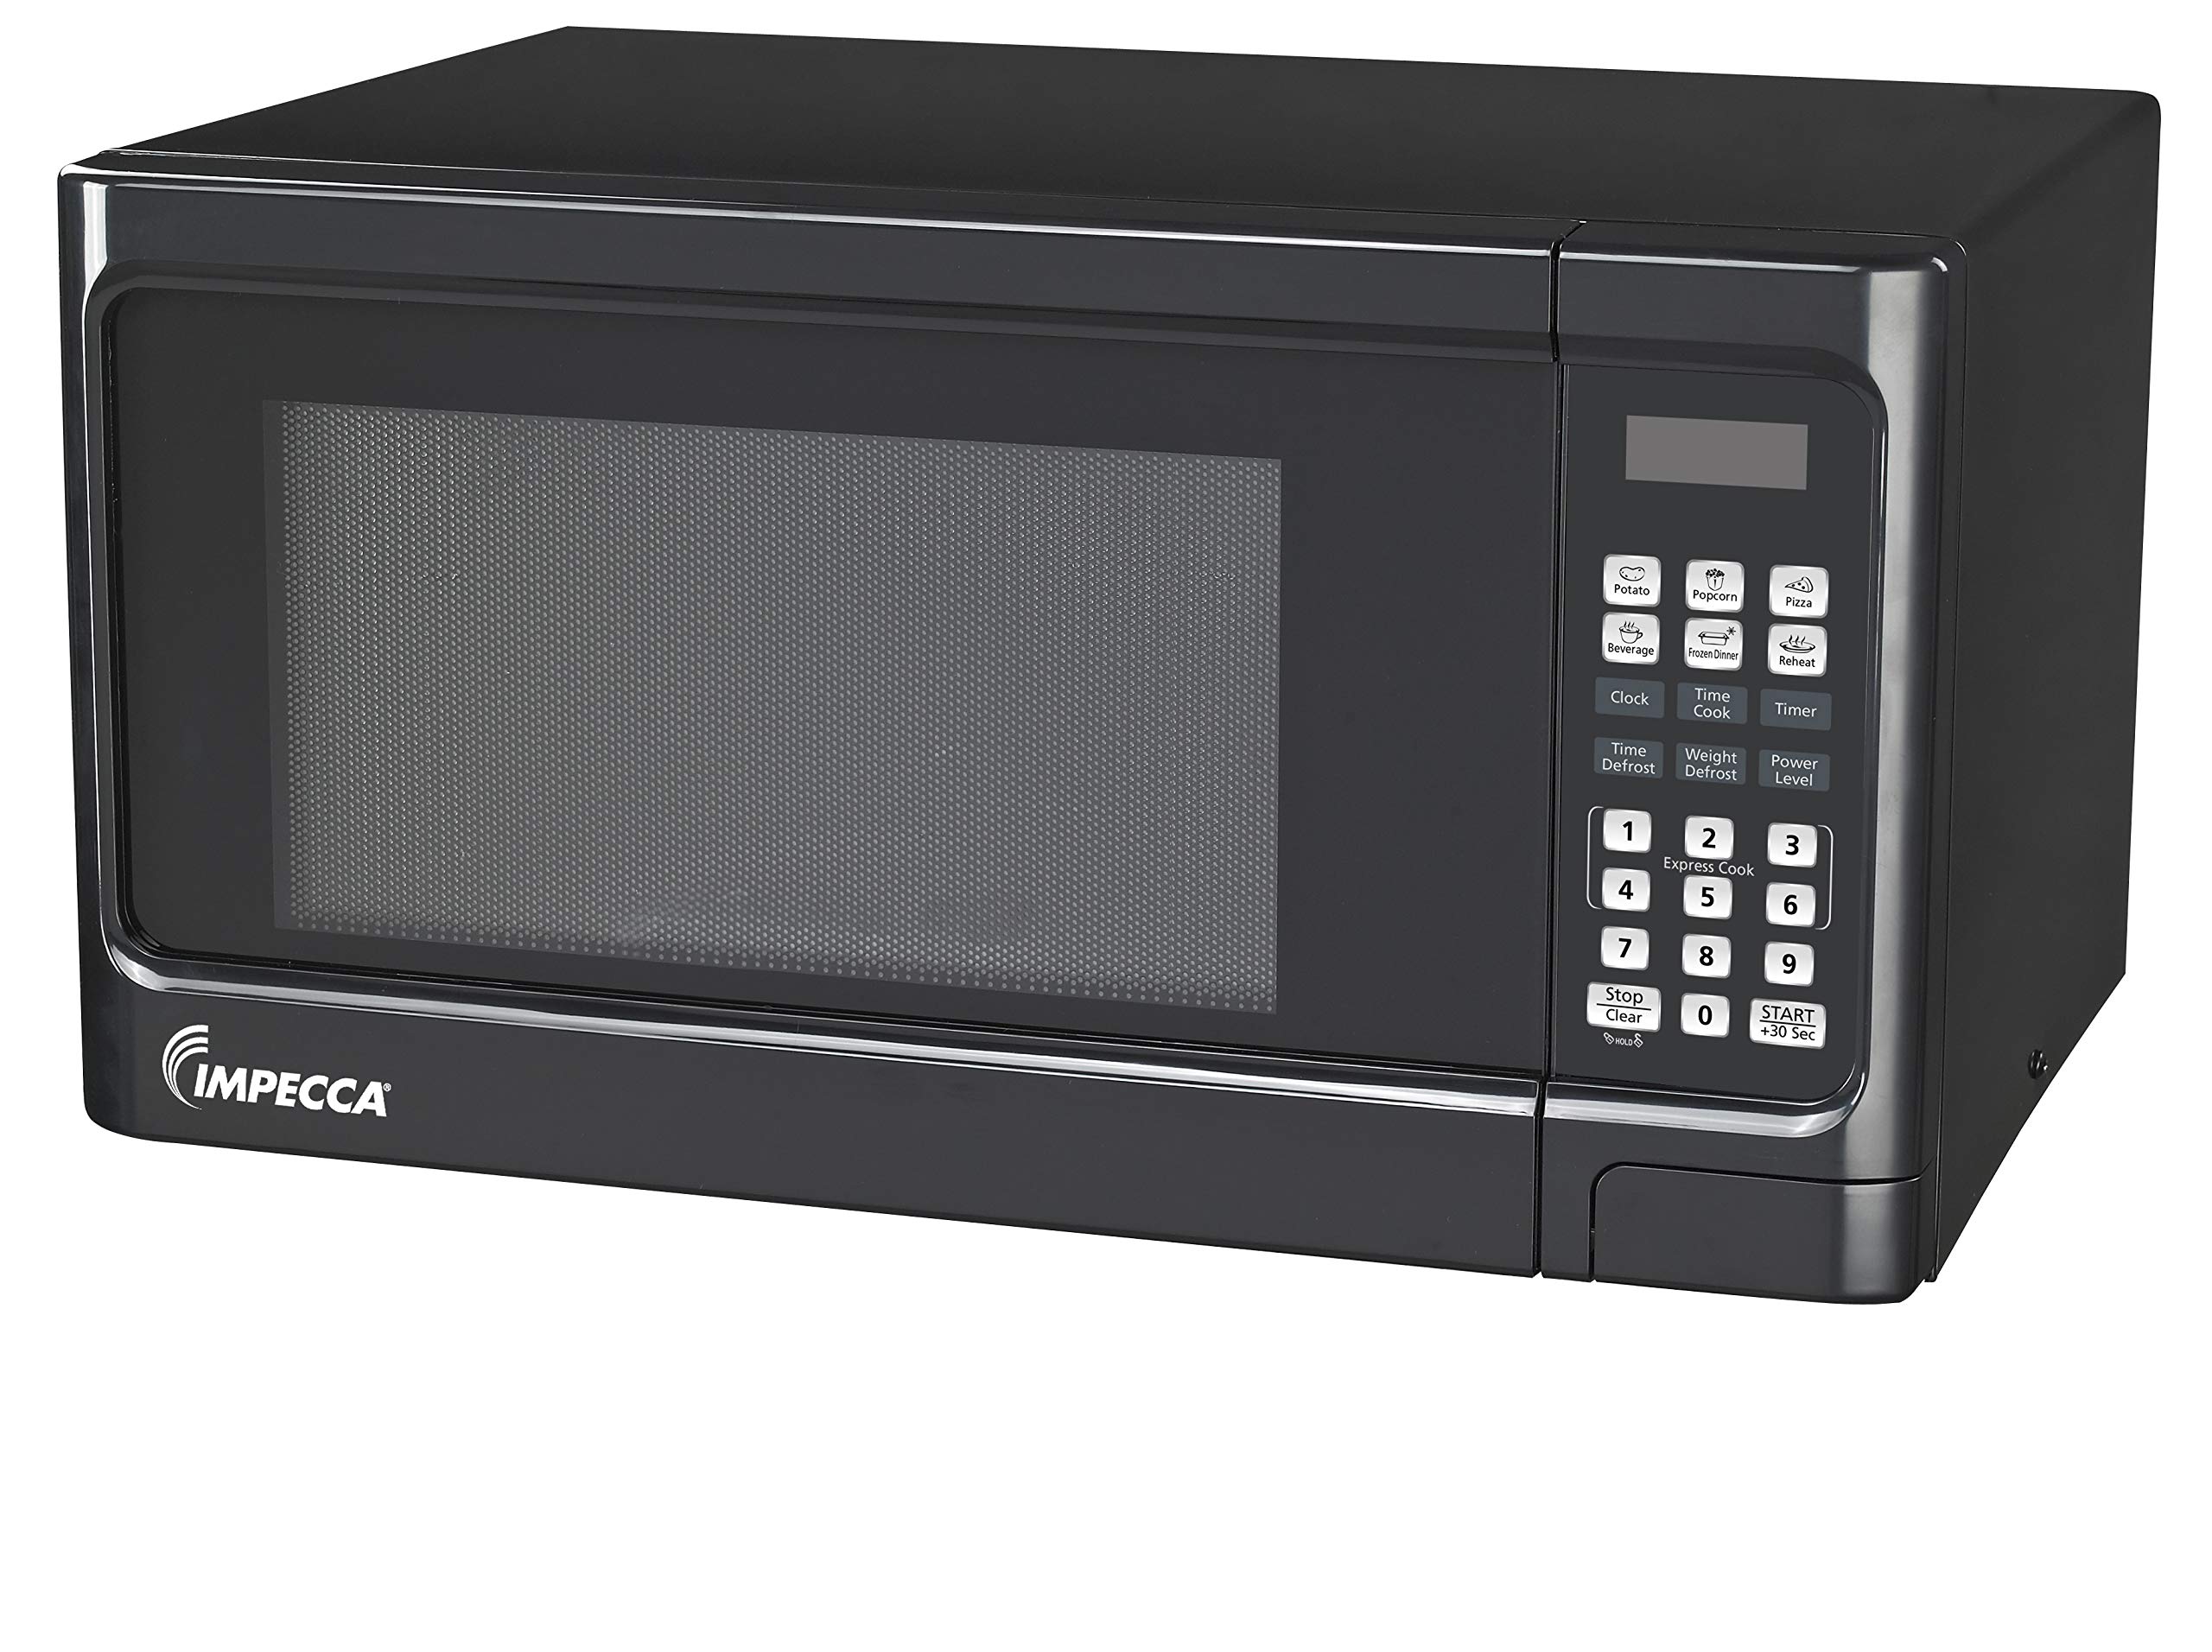 Impecca Countertop Microwave Oven 11 Cubic Feet, 1000 Watts With 10 Power Levels And Led Digital Display, Black